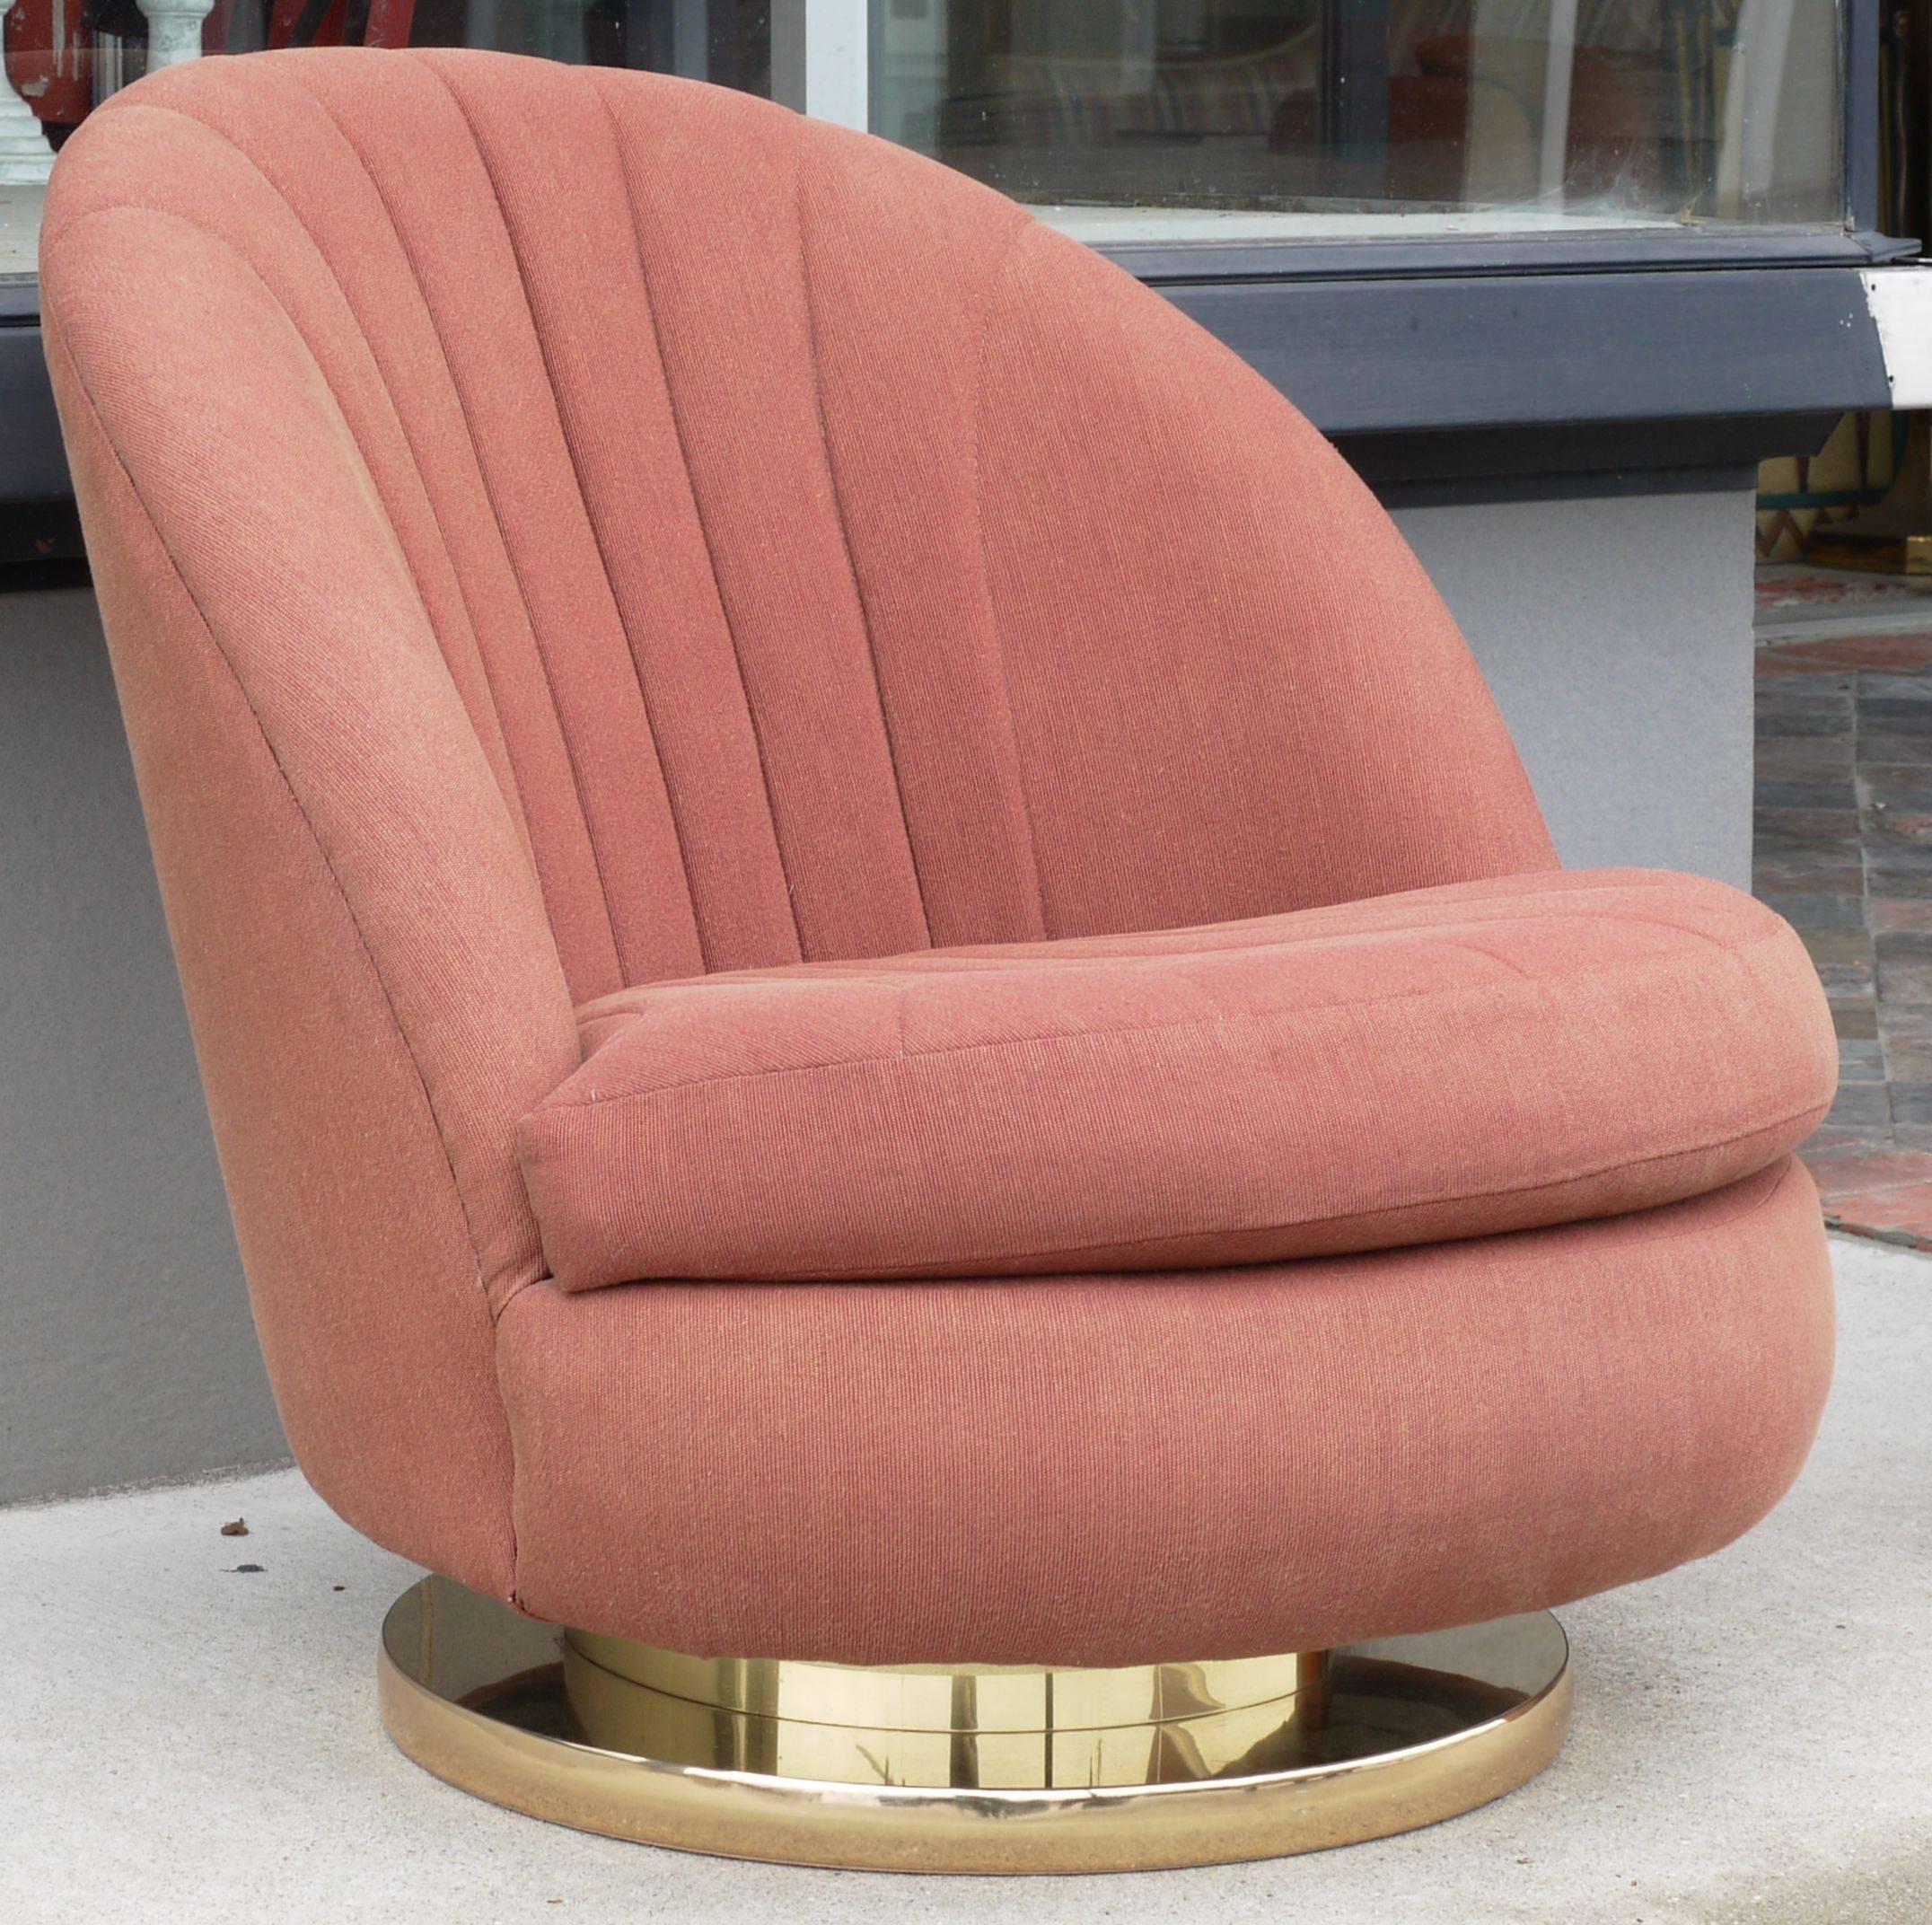 Chic Milo Baughman for Thayer Coggin brass based tilt and swivel chairs. Upholstery is original and is in good shape with minor fading, foam is still soft. Brass base is in excellent condition.